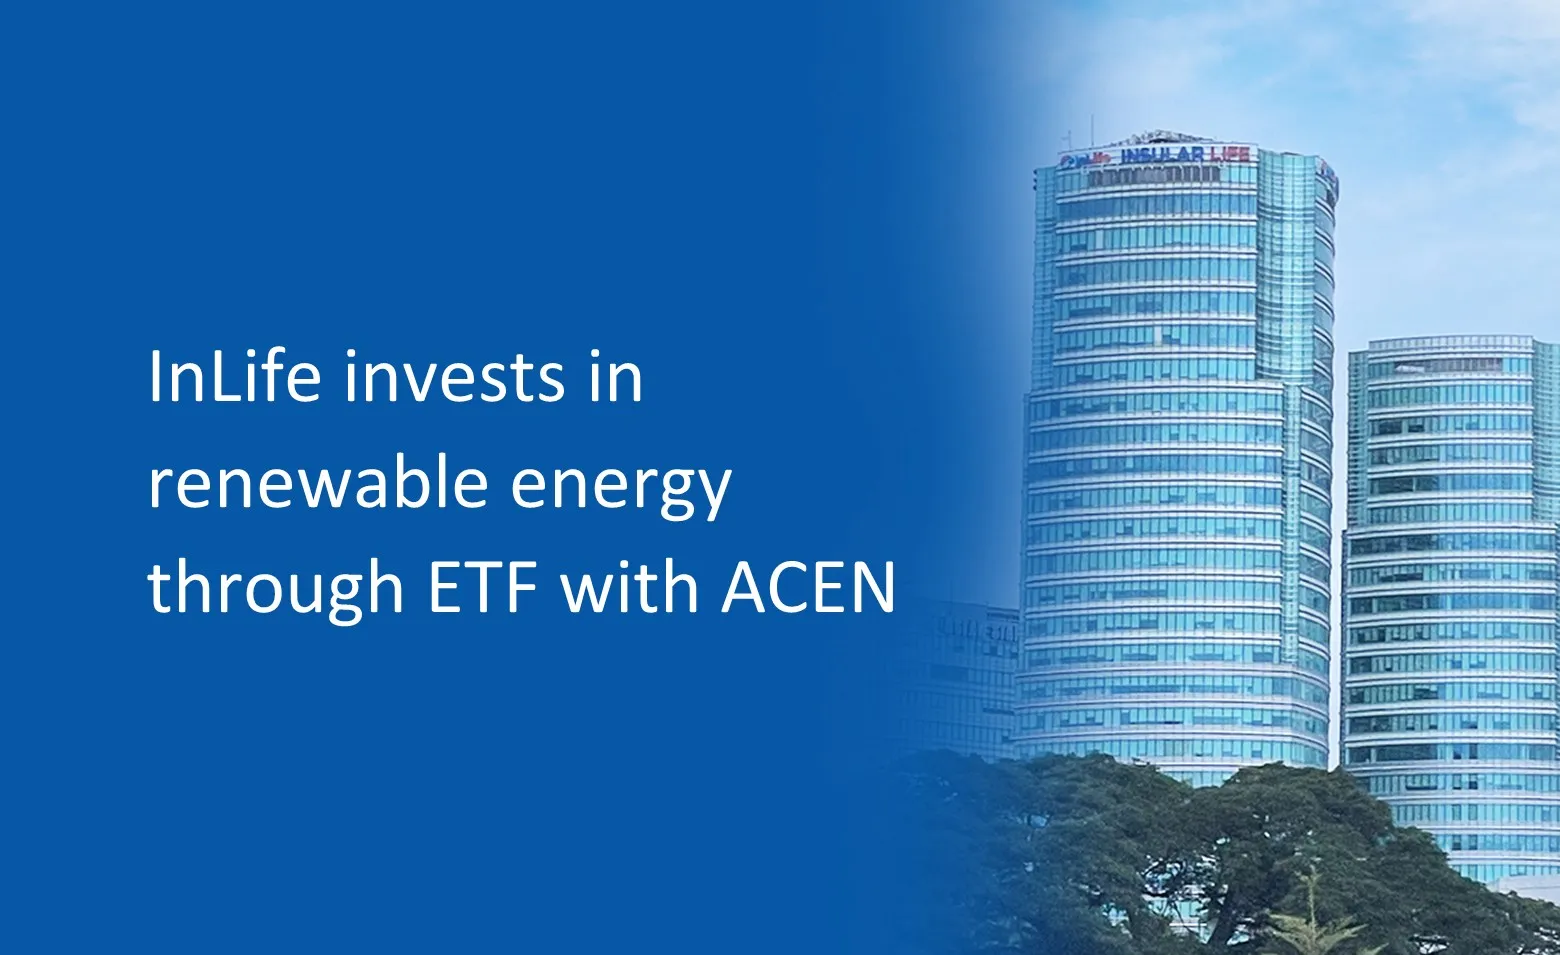 inlife-invests-in-renewable-energy-through-etf-with-acen